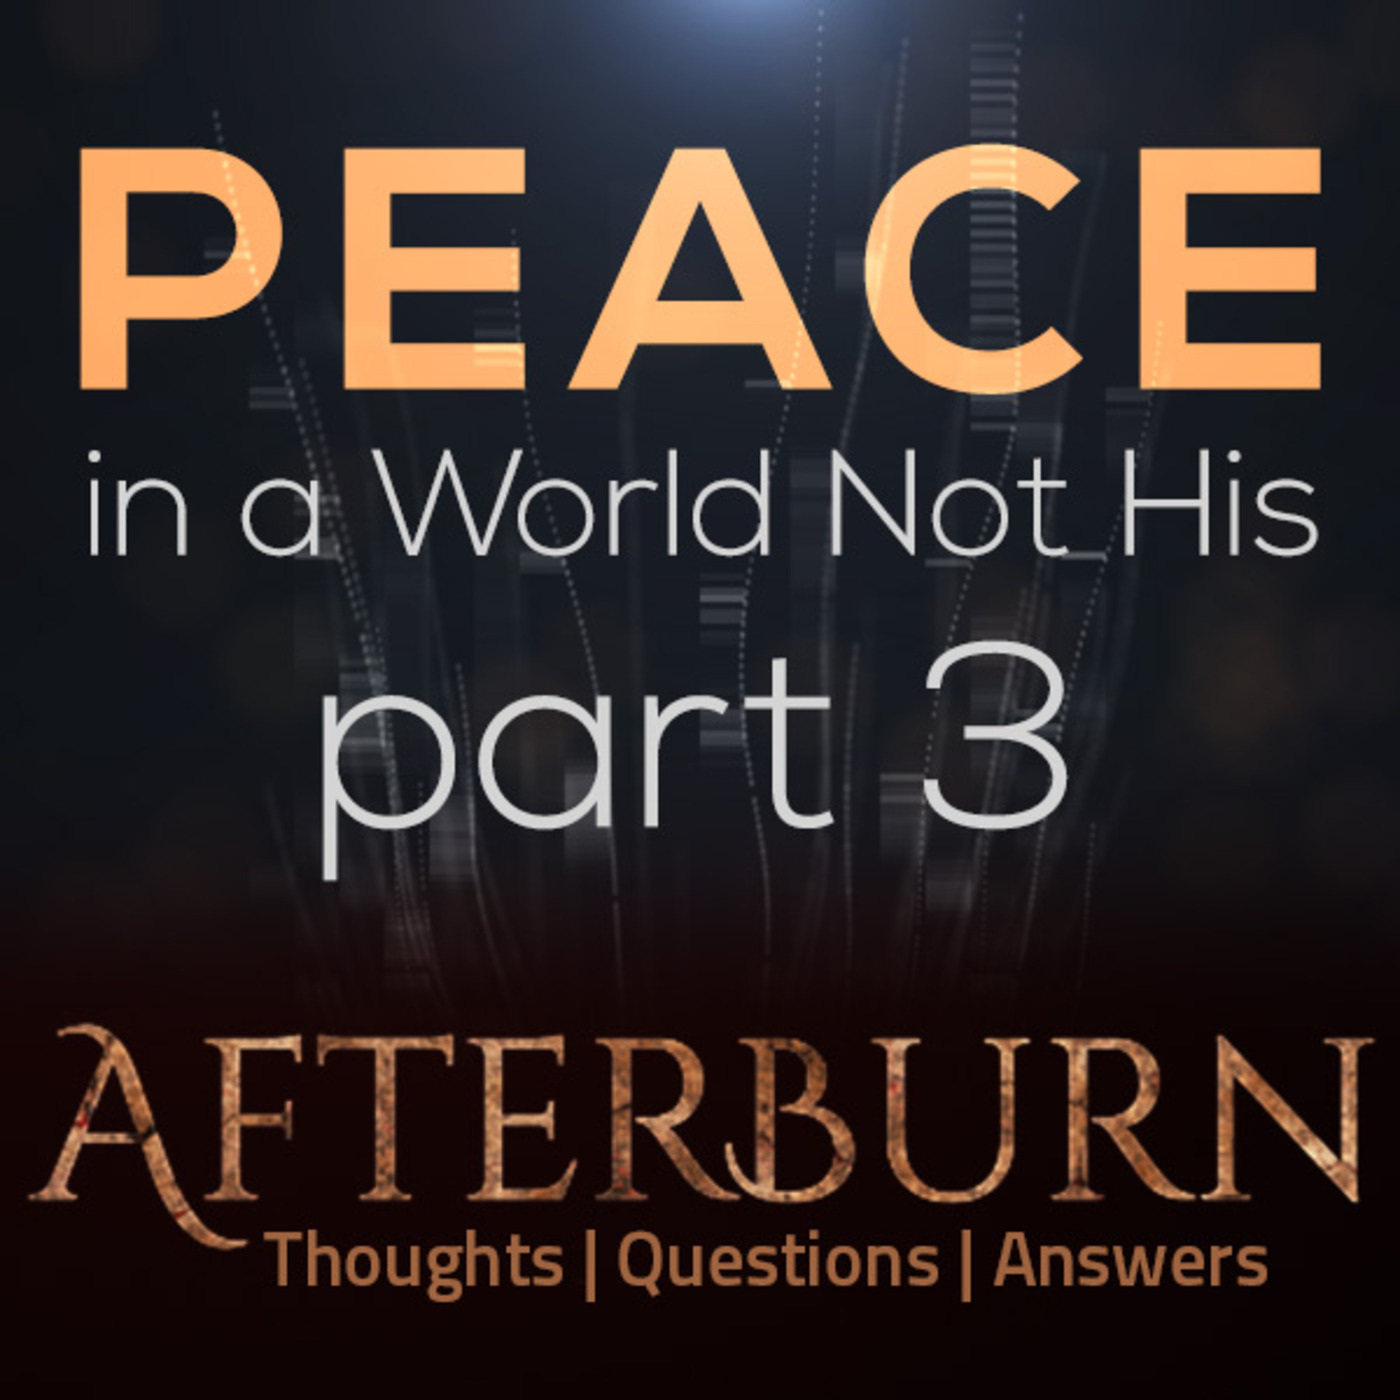 Afterburn: Thoughts, Q&A on Peace in a World Not His - Part 3